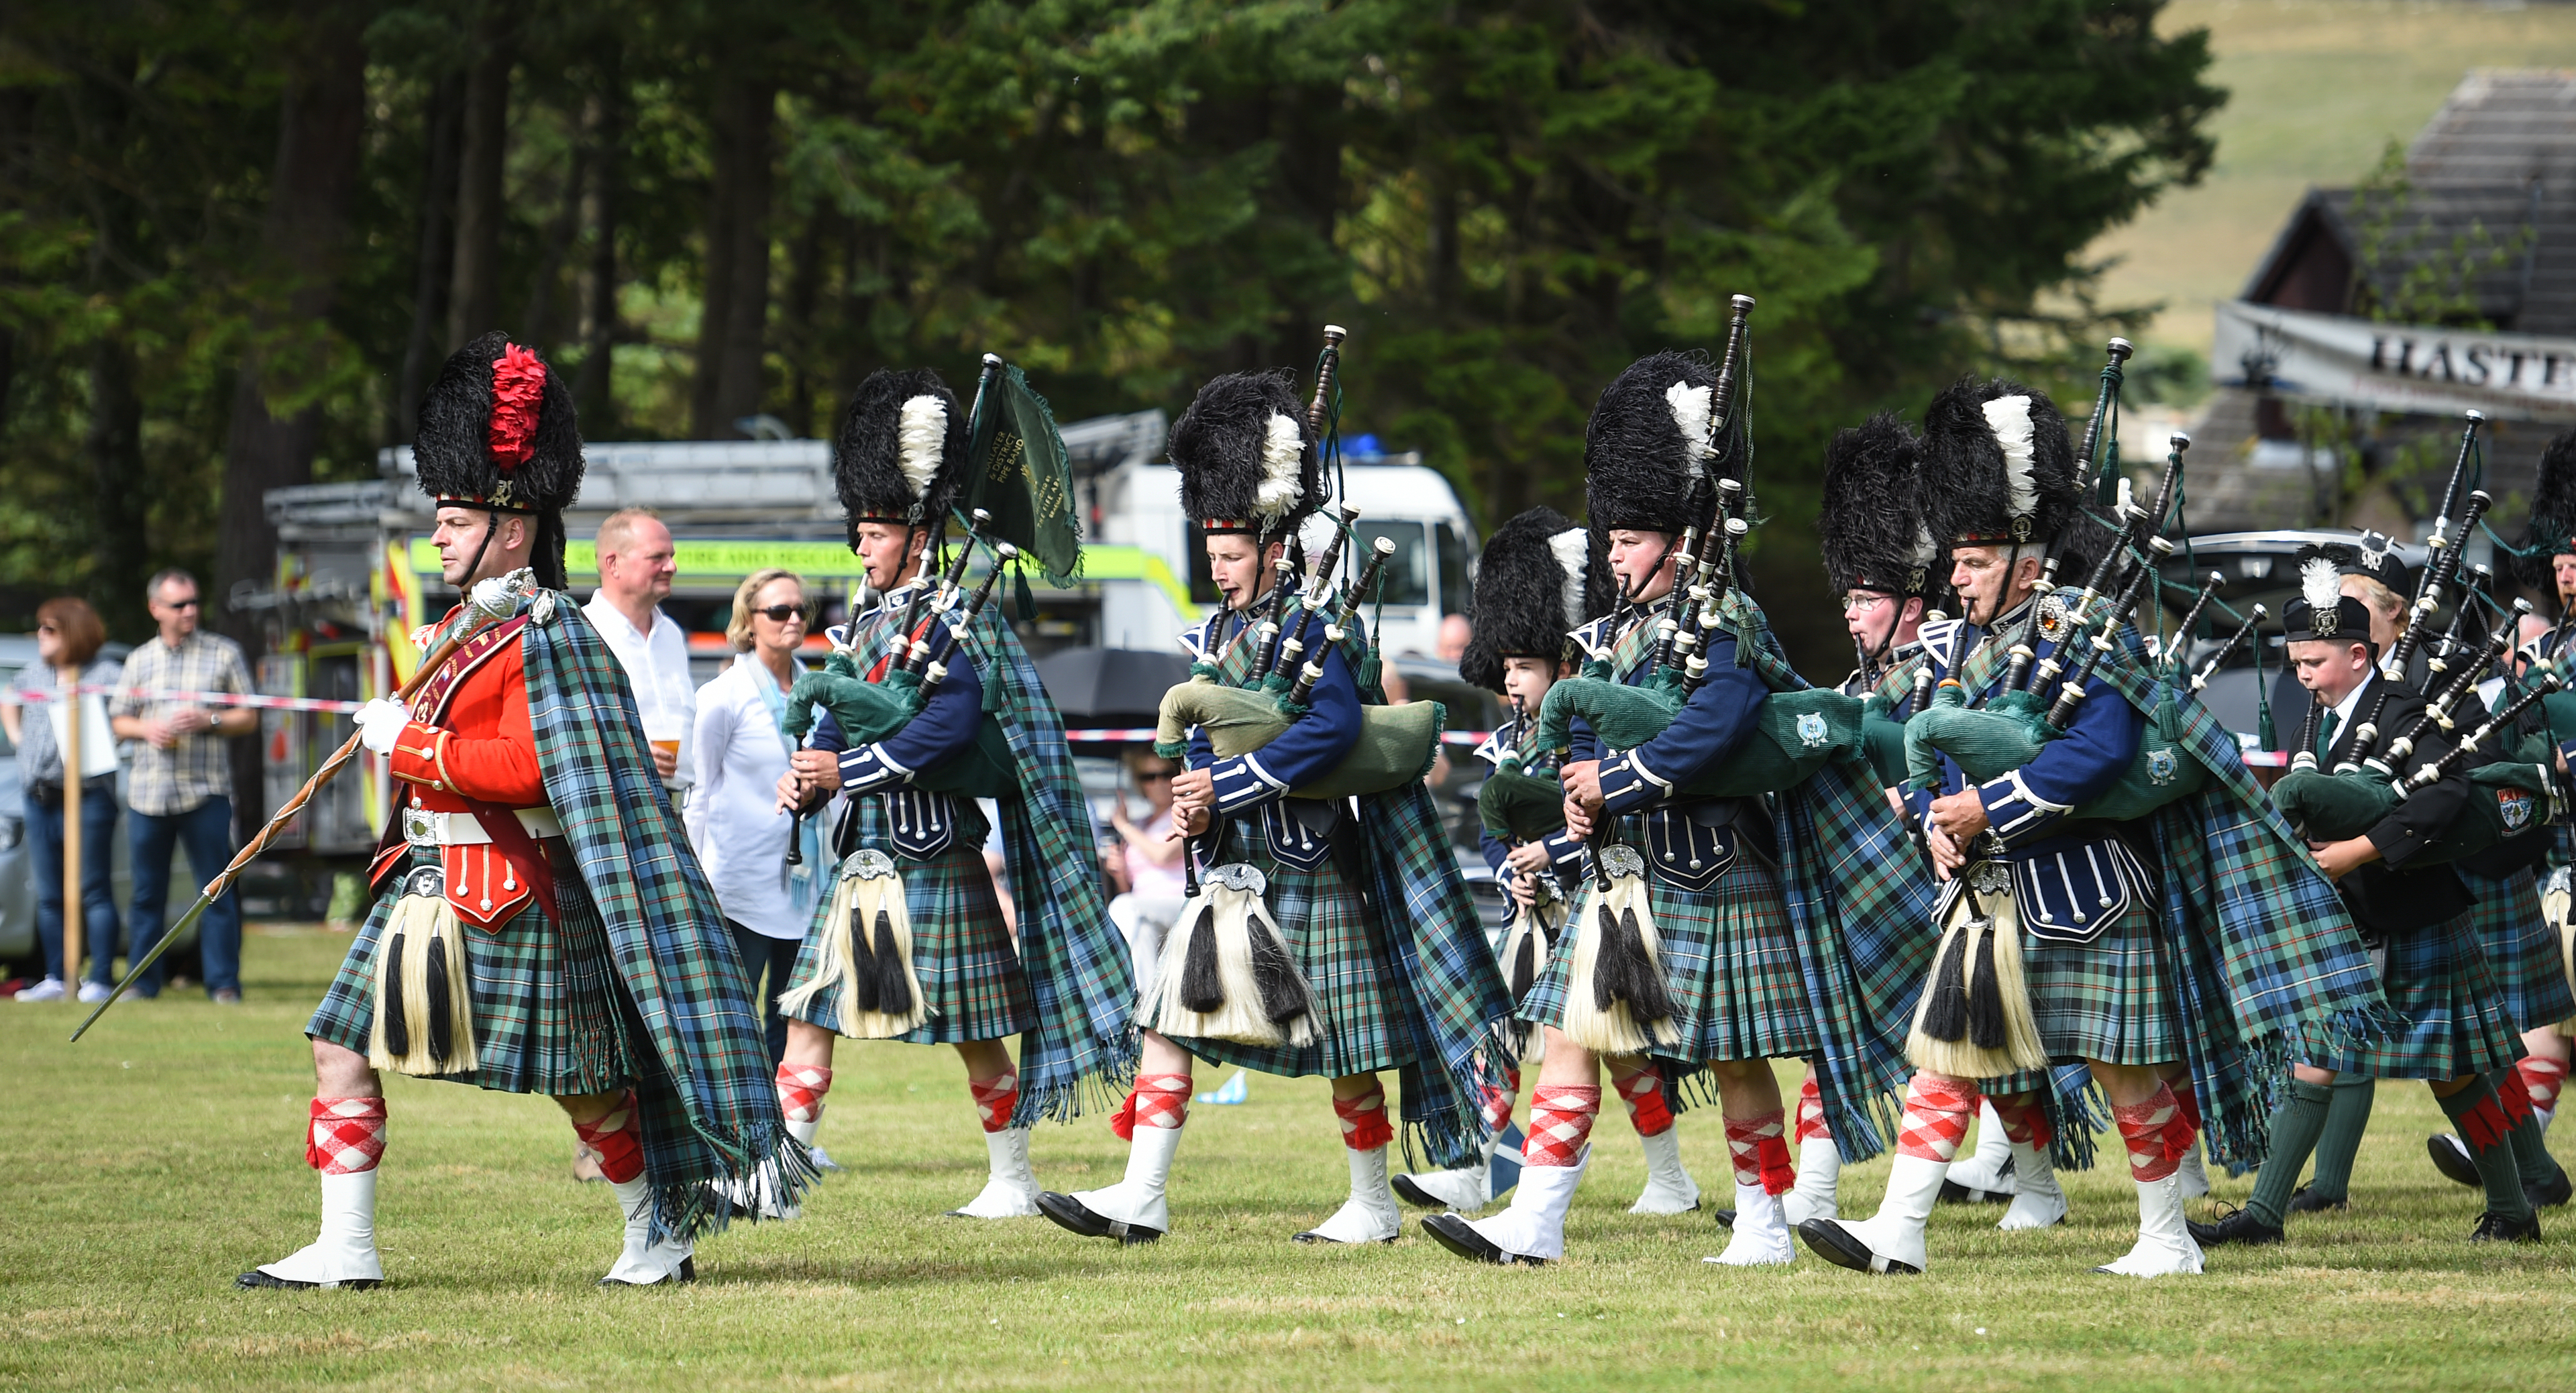 Picture by JASON HEDGES 

Pictures show the sporting events of Tomintoul, 2018 Highland Games.

Picture: Ballater and distict pipe band plays.